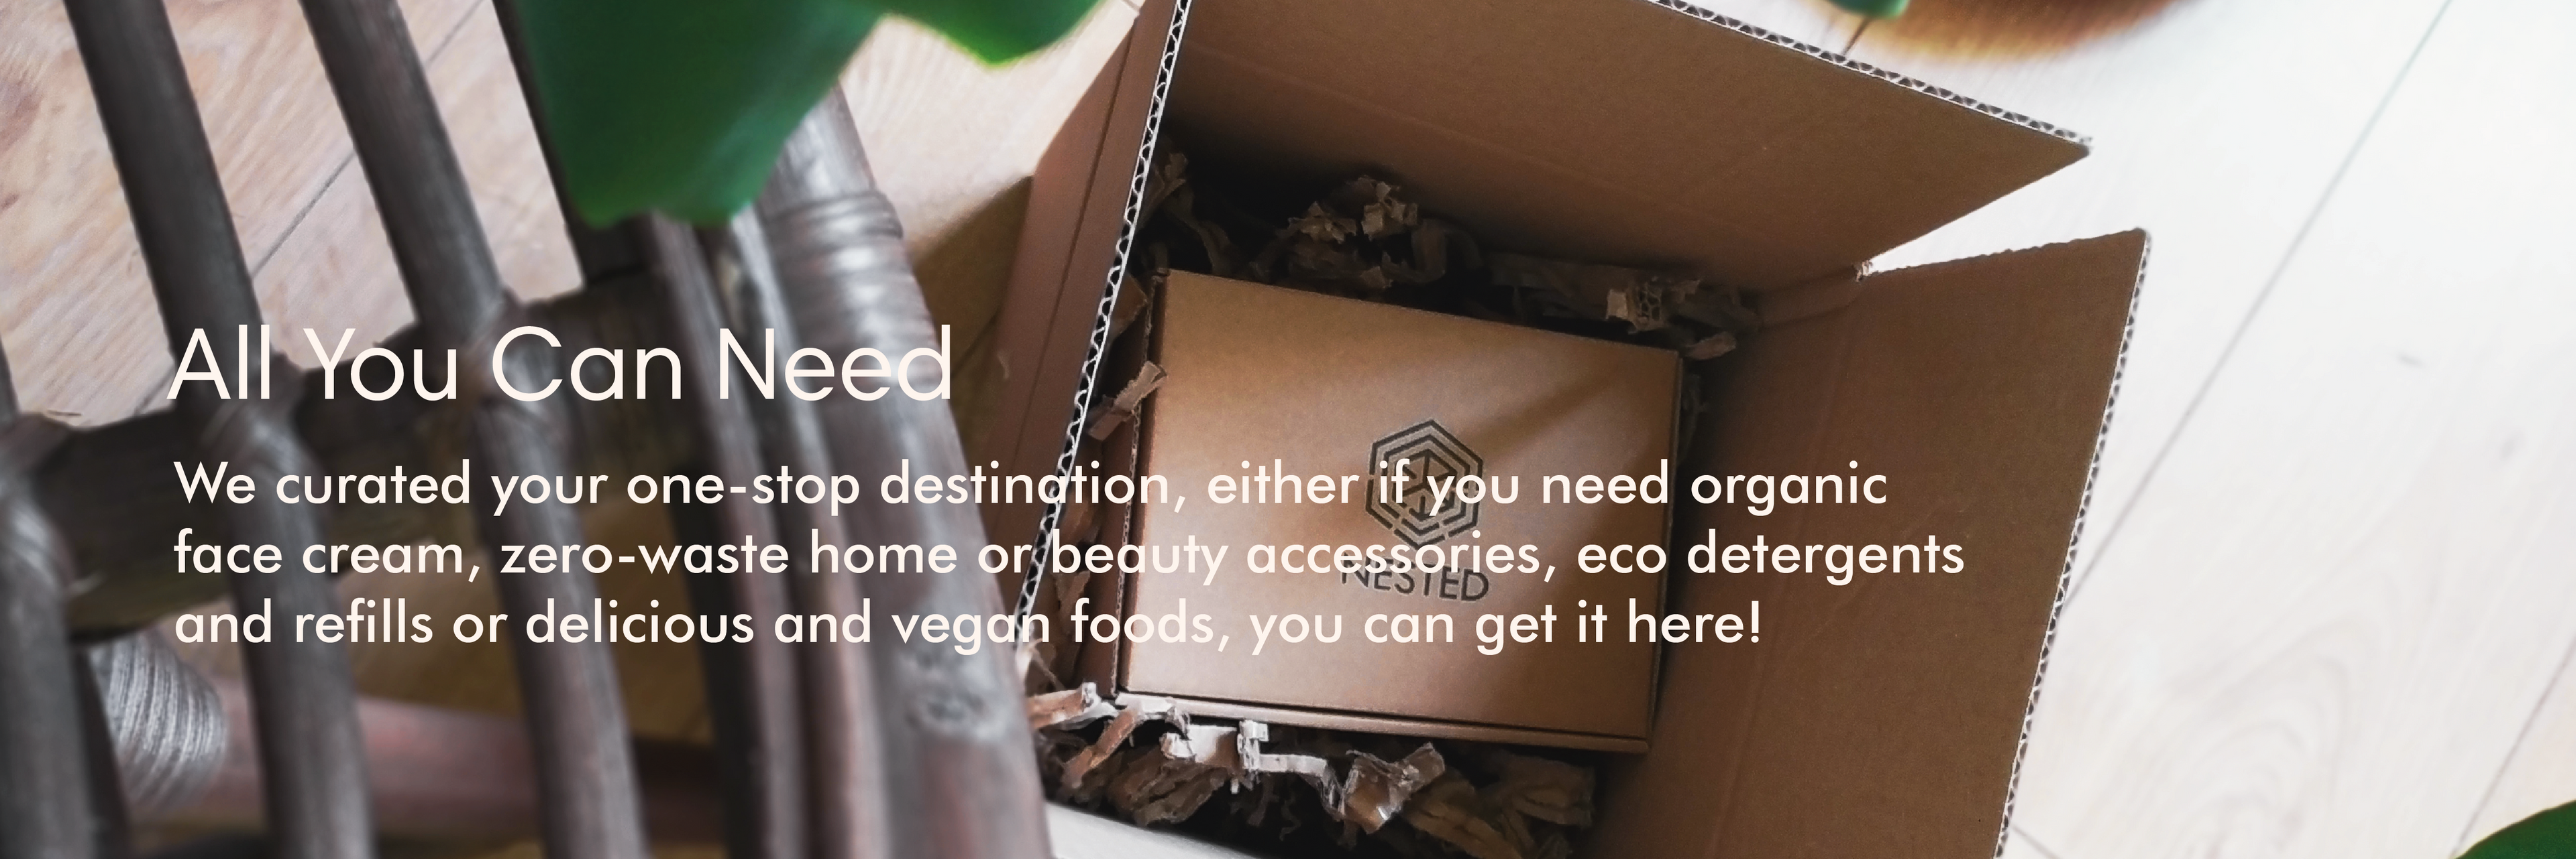 We curated your one-stop destination, either if you need organic face cream,  zero-waste home or beauty accessories, eco detergents and refills or delicious and vegan foods, you can get it here! 